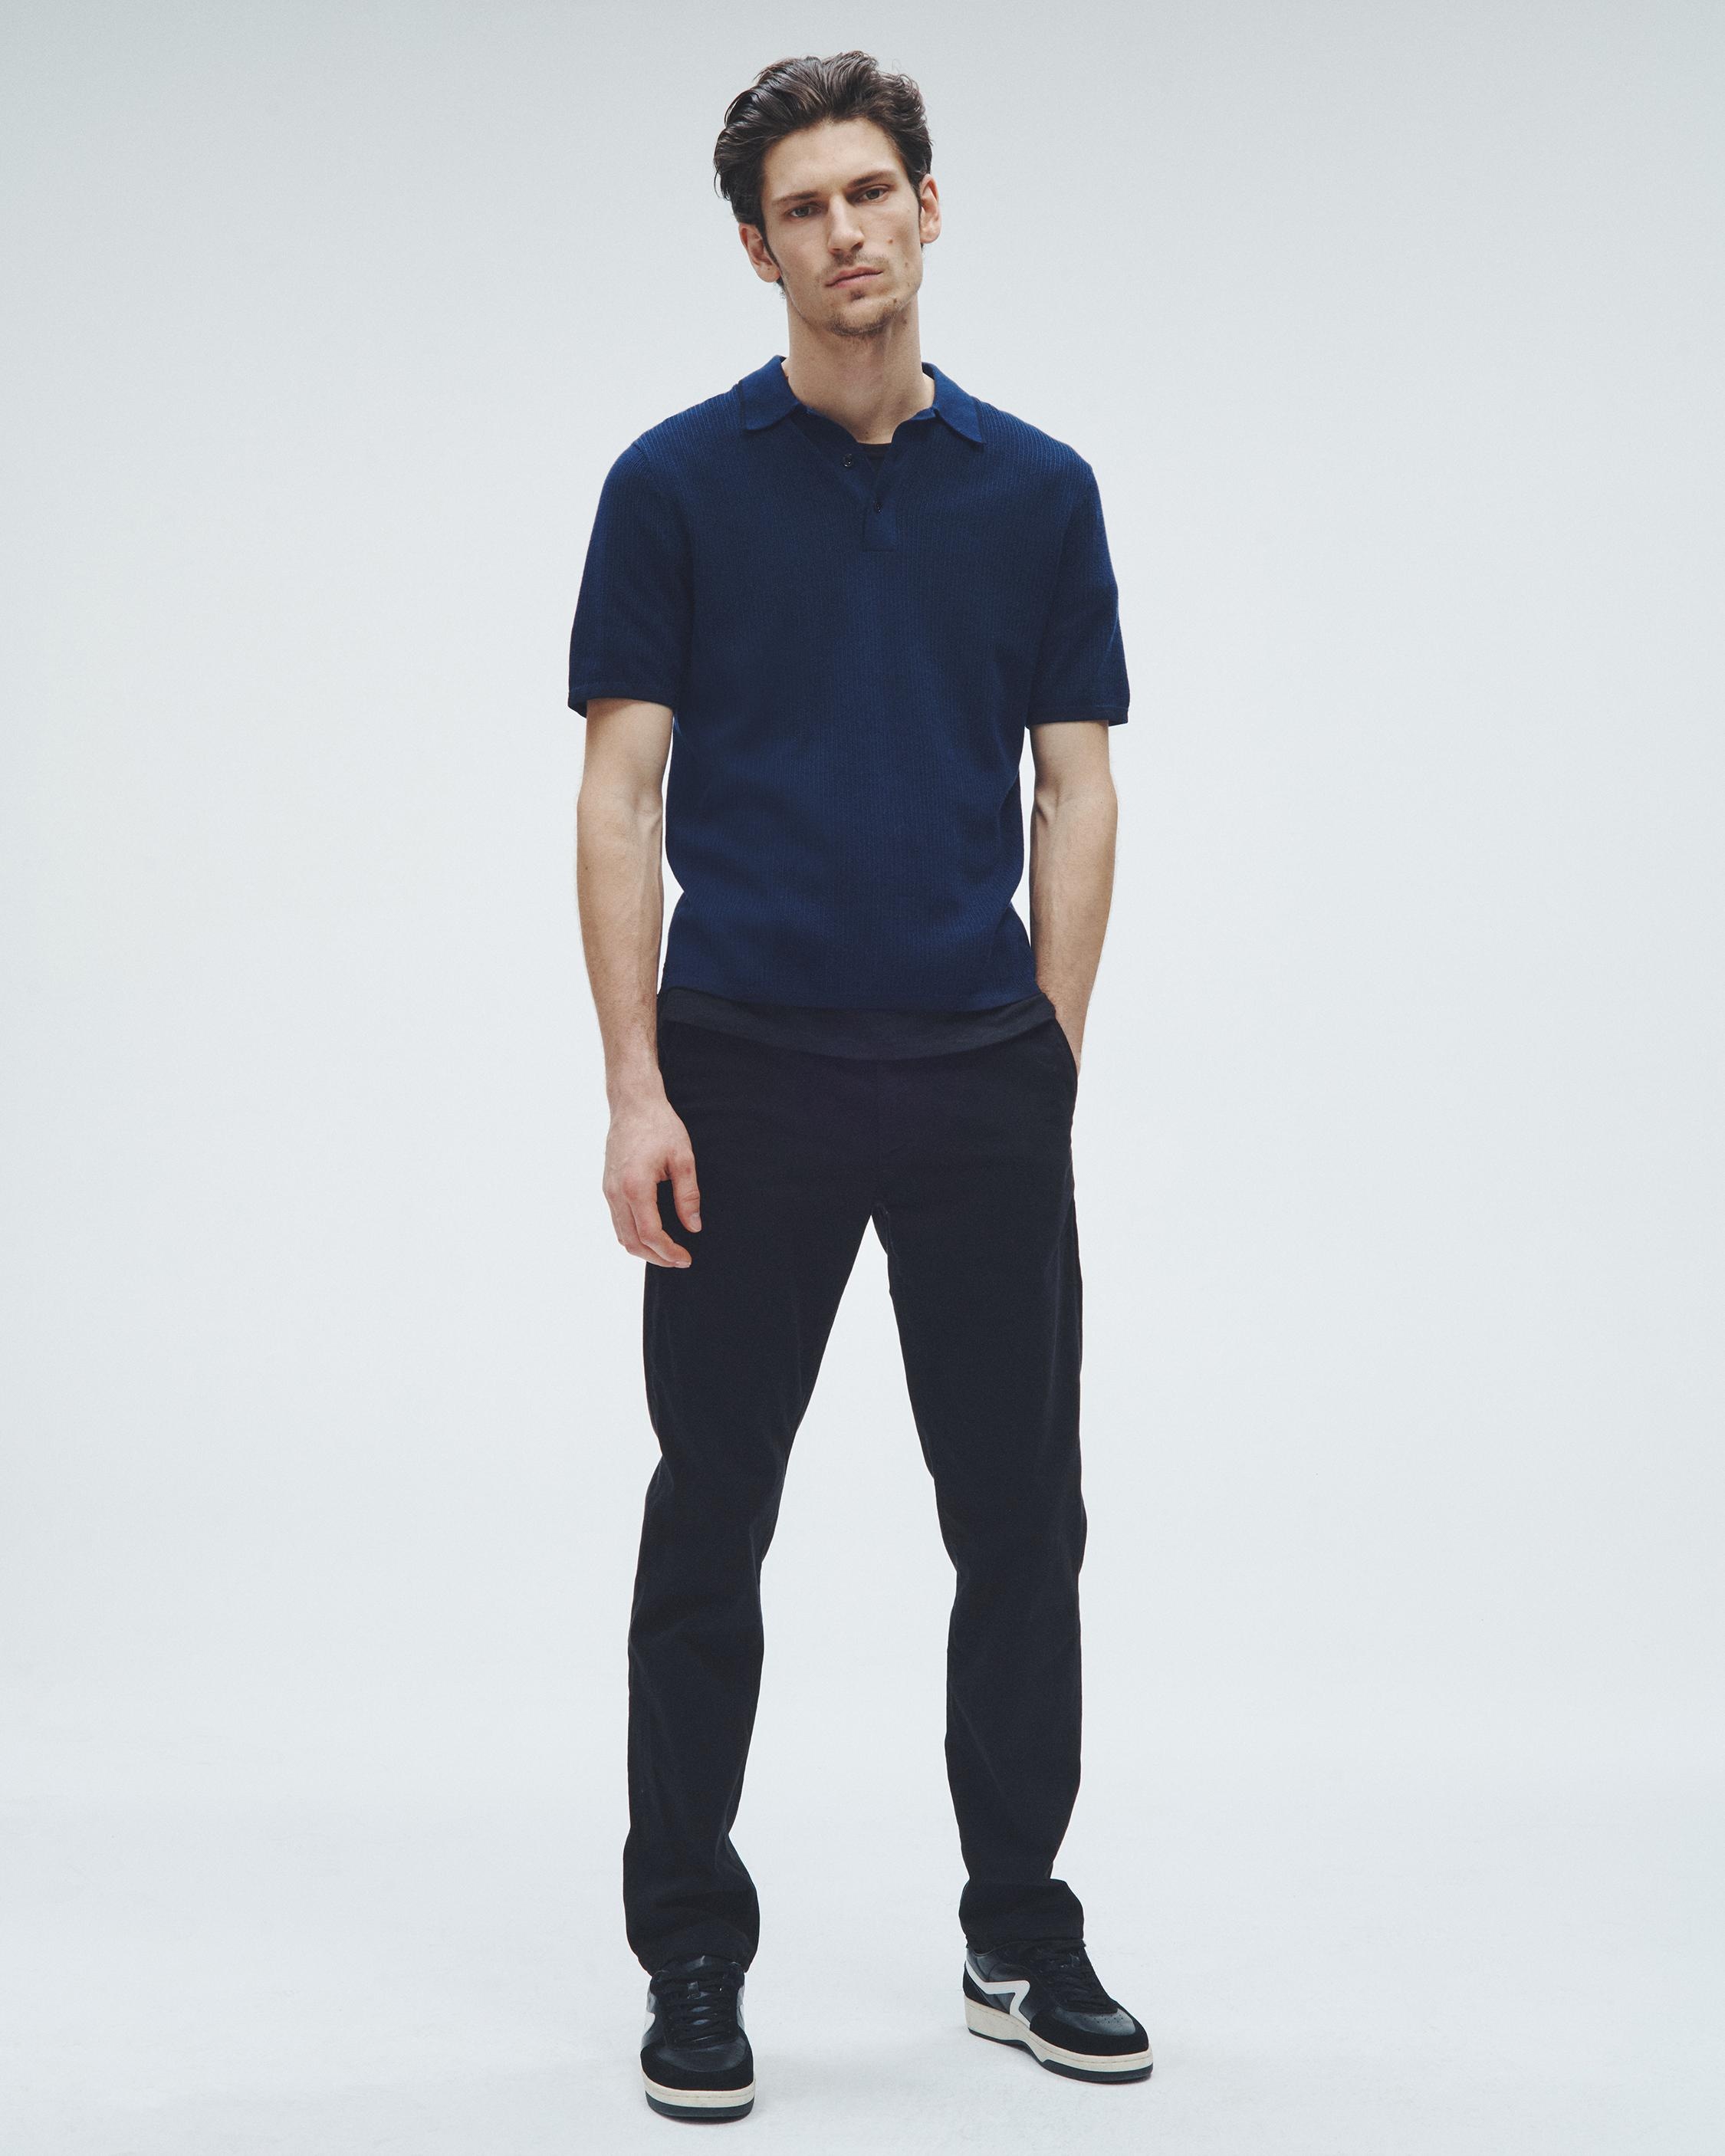 Harvey Polo
Classic Fit - 2